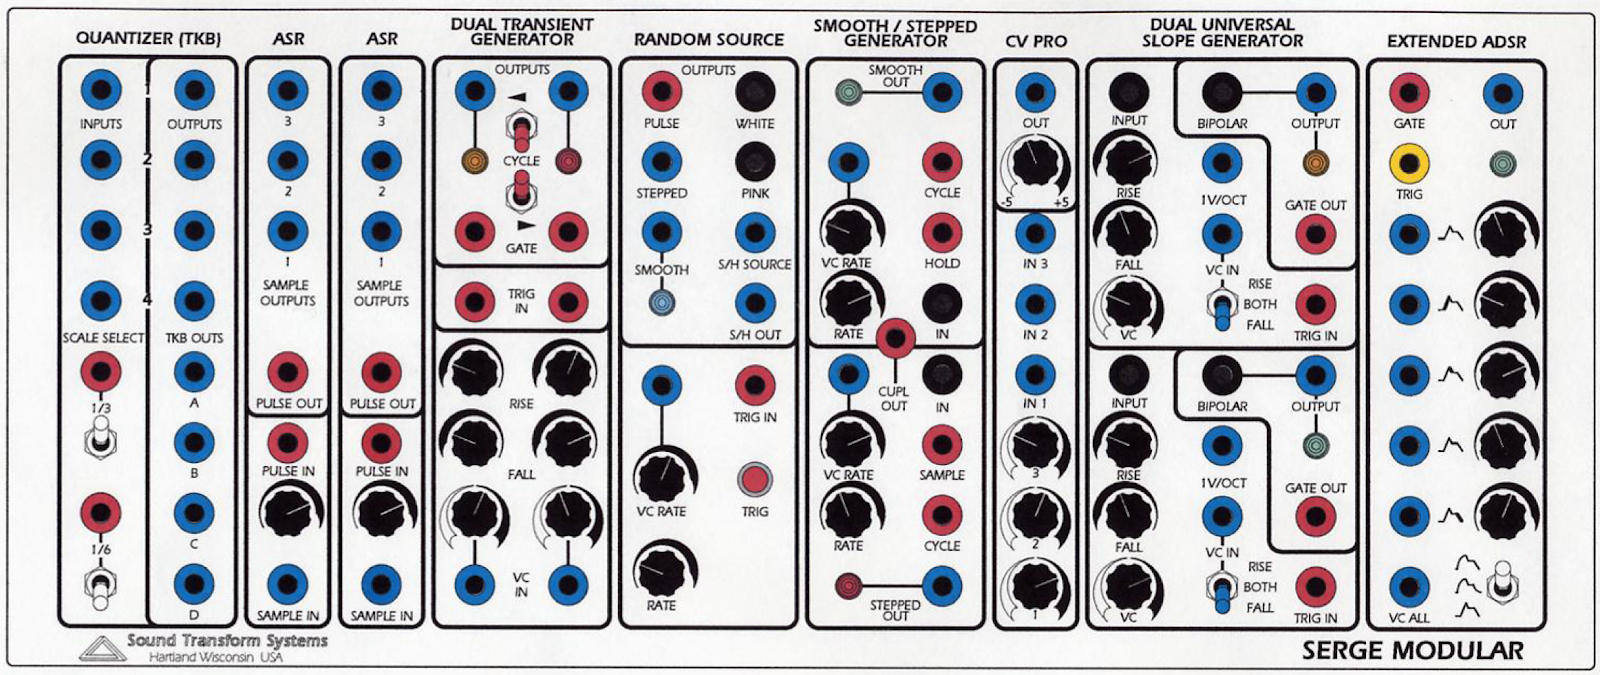 Red Control panel